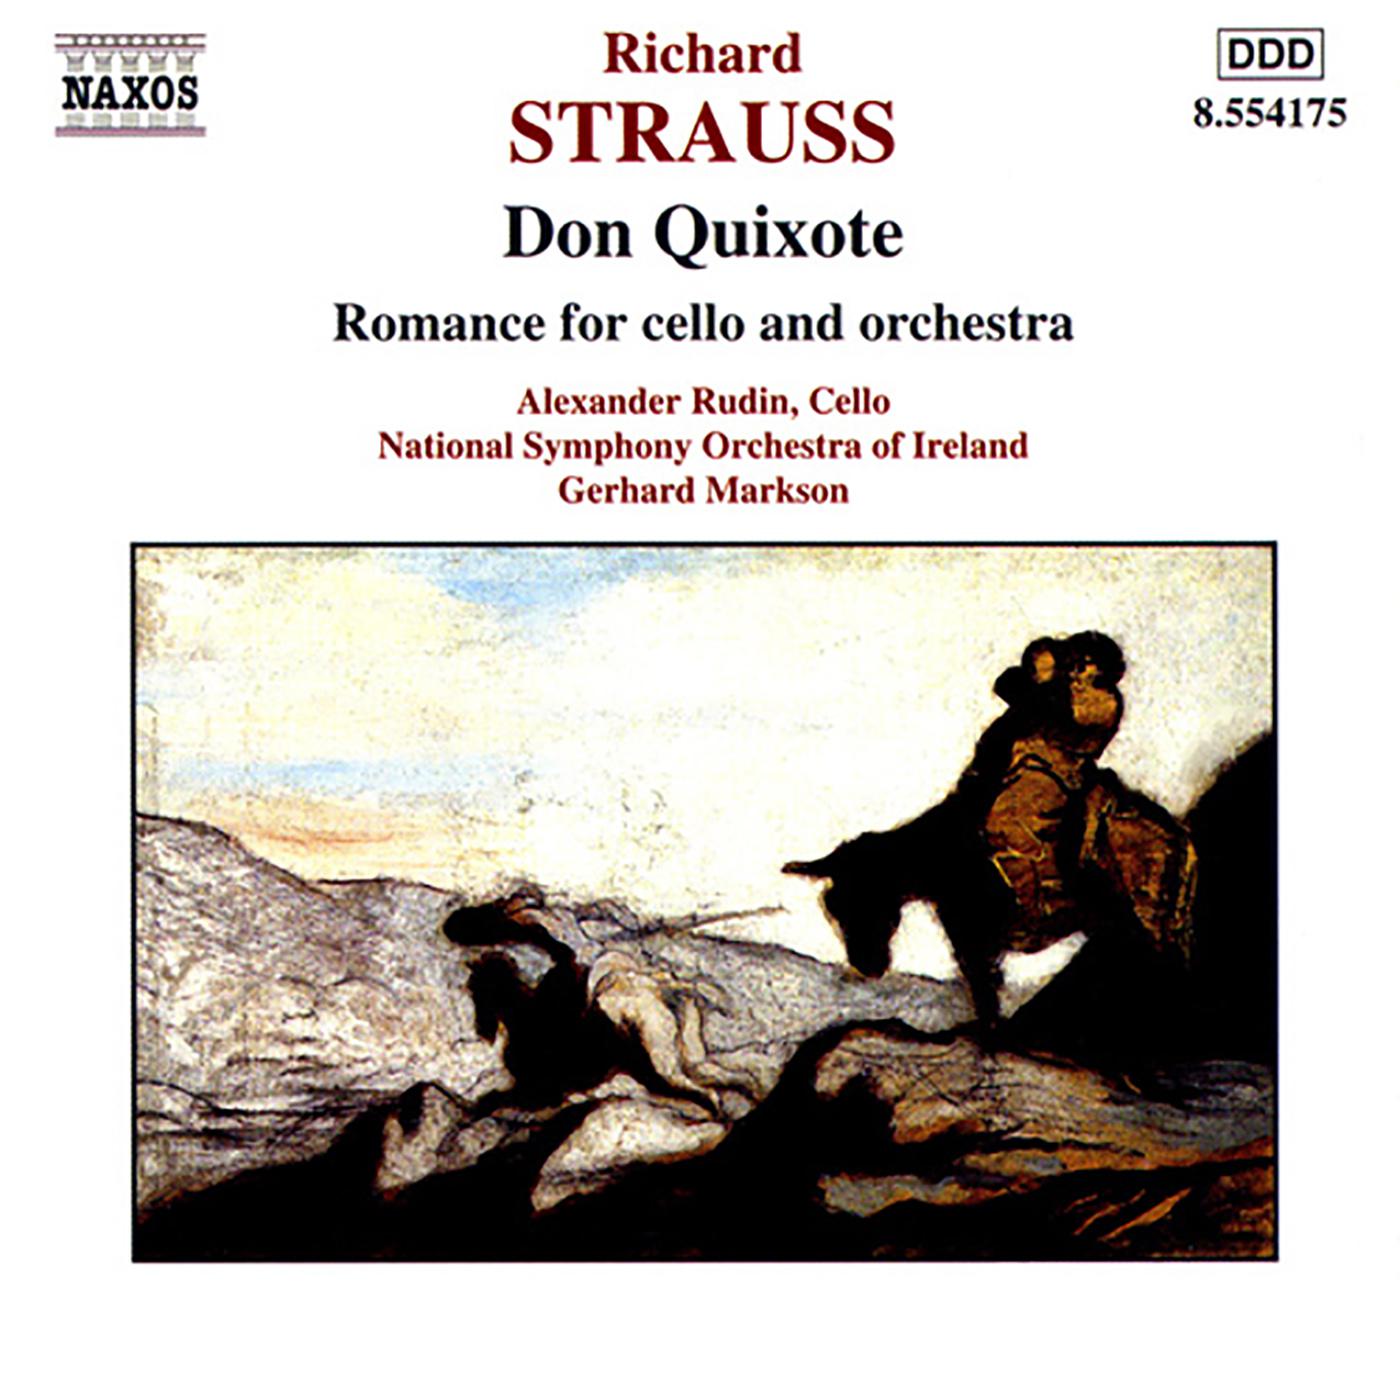 Don Quixote, Op. 35, TrV 184:Don Quixote, The Knight of the Sorrowful Countenance - Sancho Panza: Massig